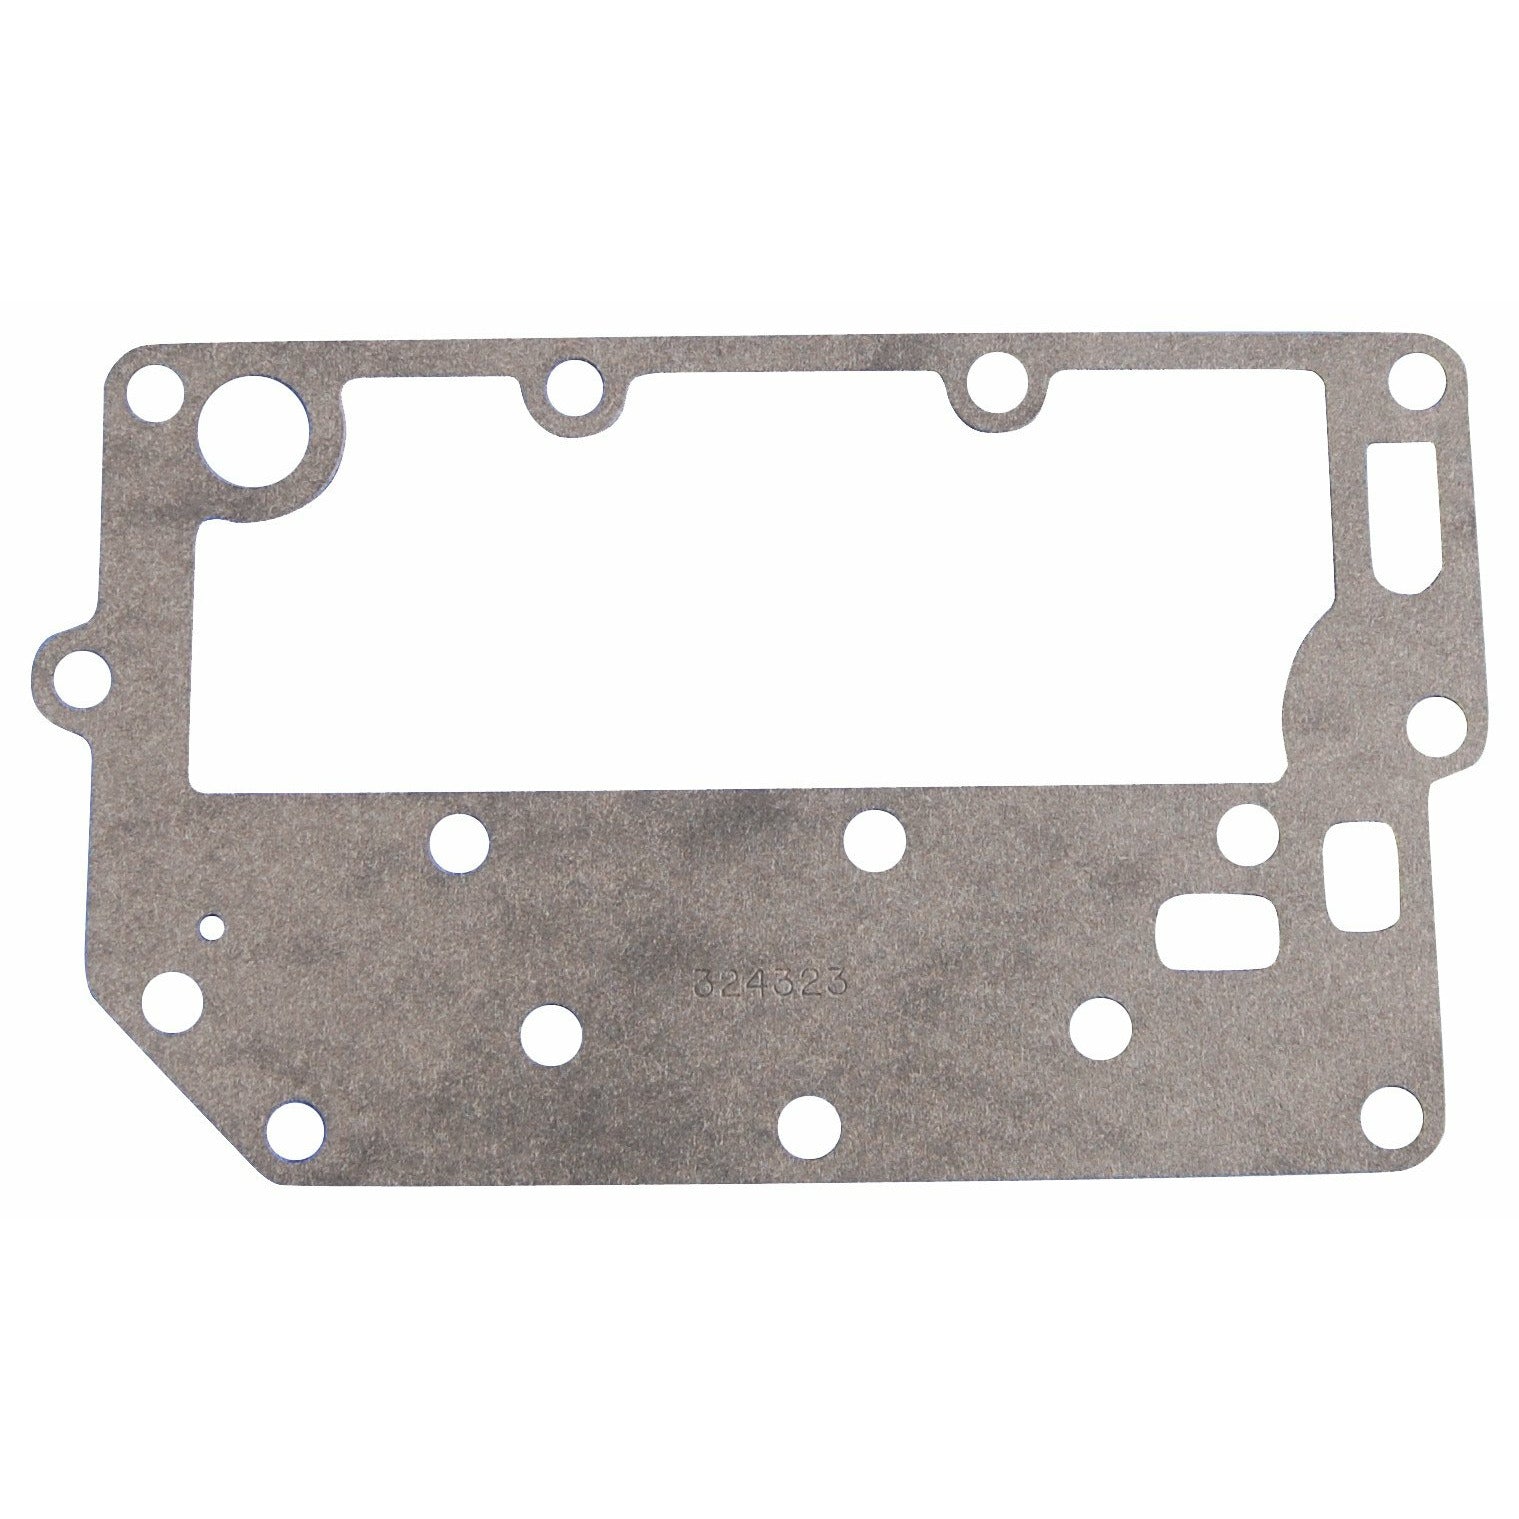 Evinrude Gasket Exhaust Cover 0324323